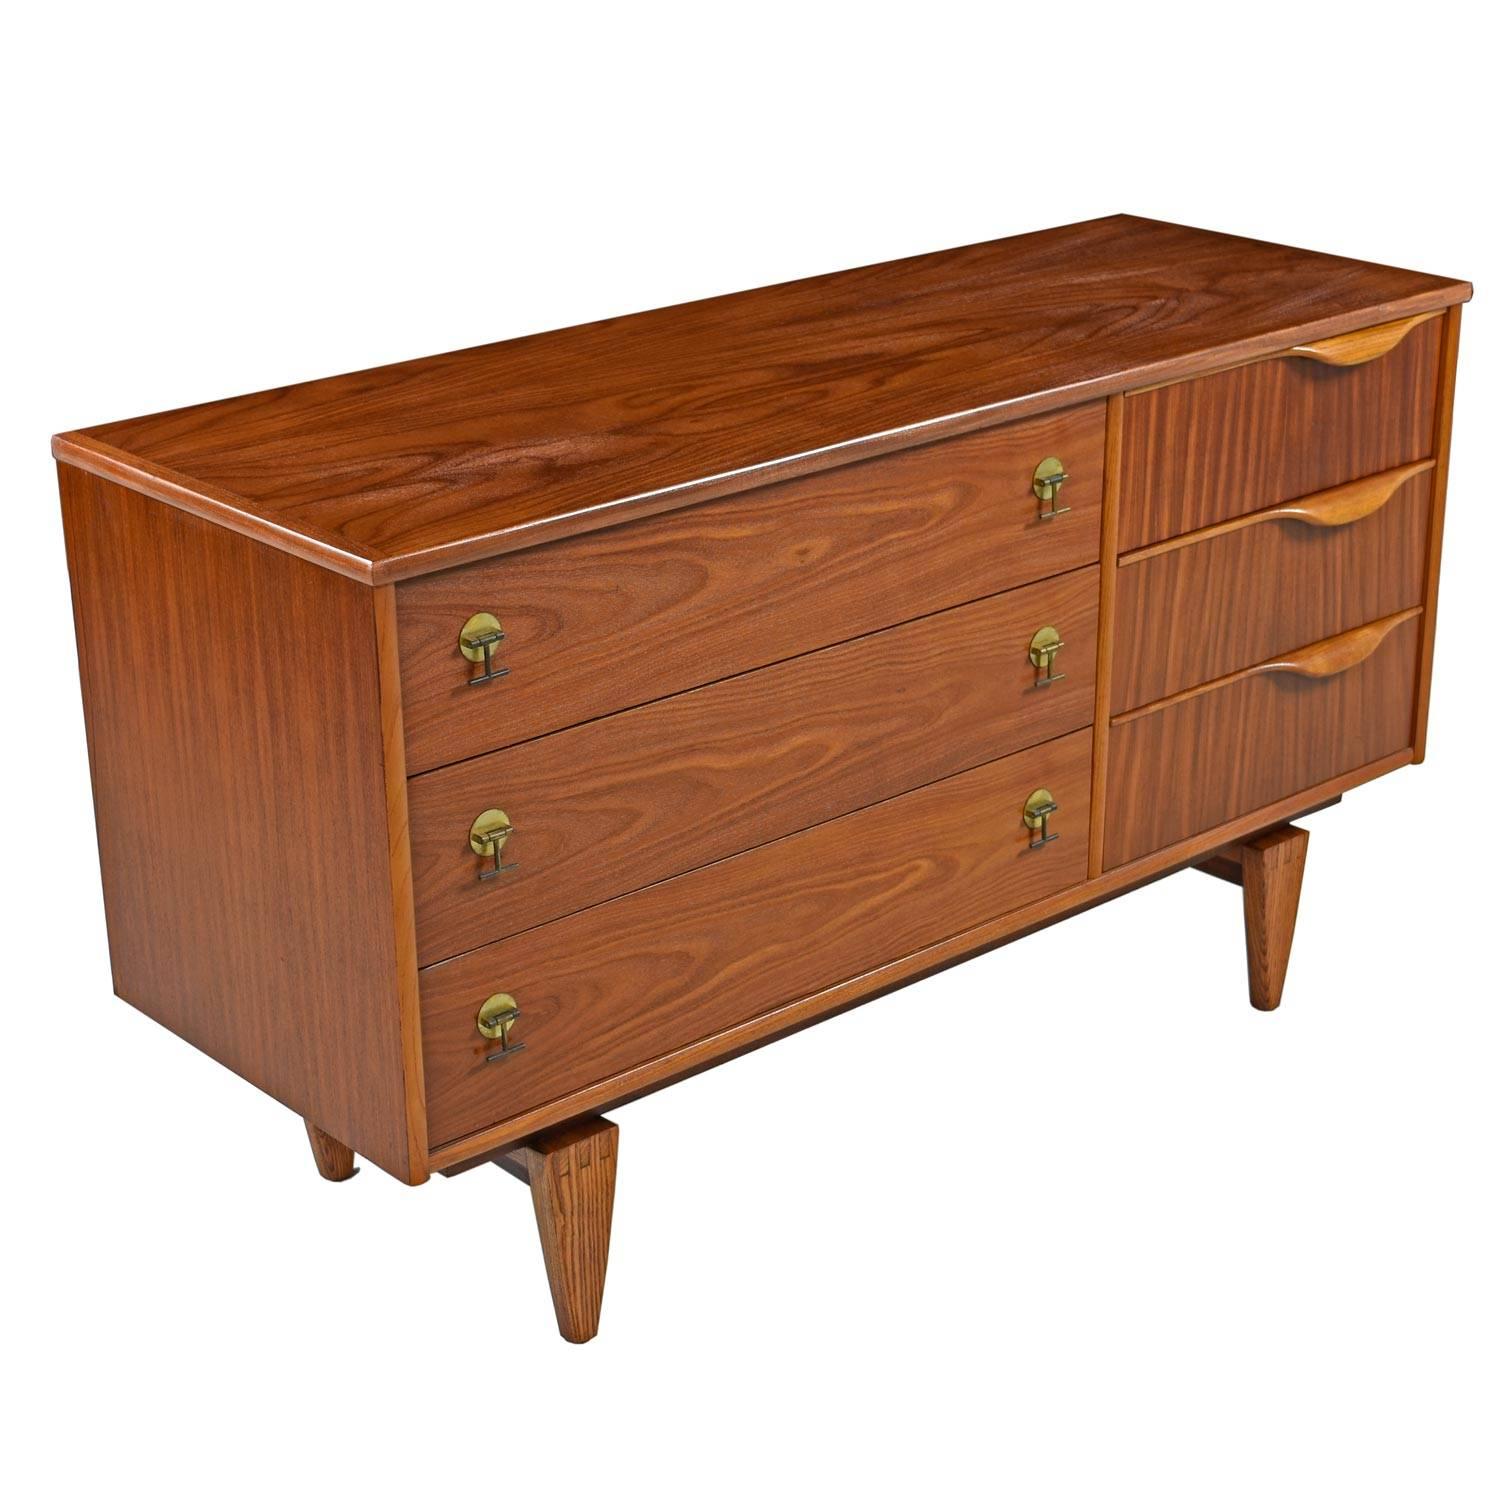 This stunning Mid-Century Modern credenza or dresser was created by Stanley in the 1960s. Lovely design details such as sculptural lipped pulls, breathtaking wood grains and tapered legs celebrate the time period beautifully. The structure and